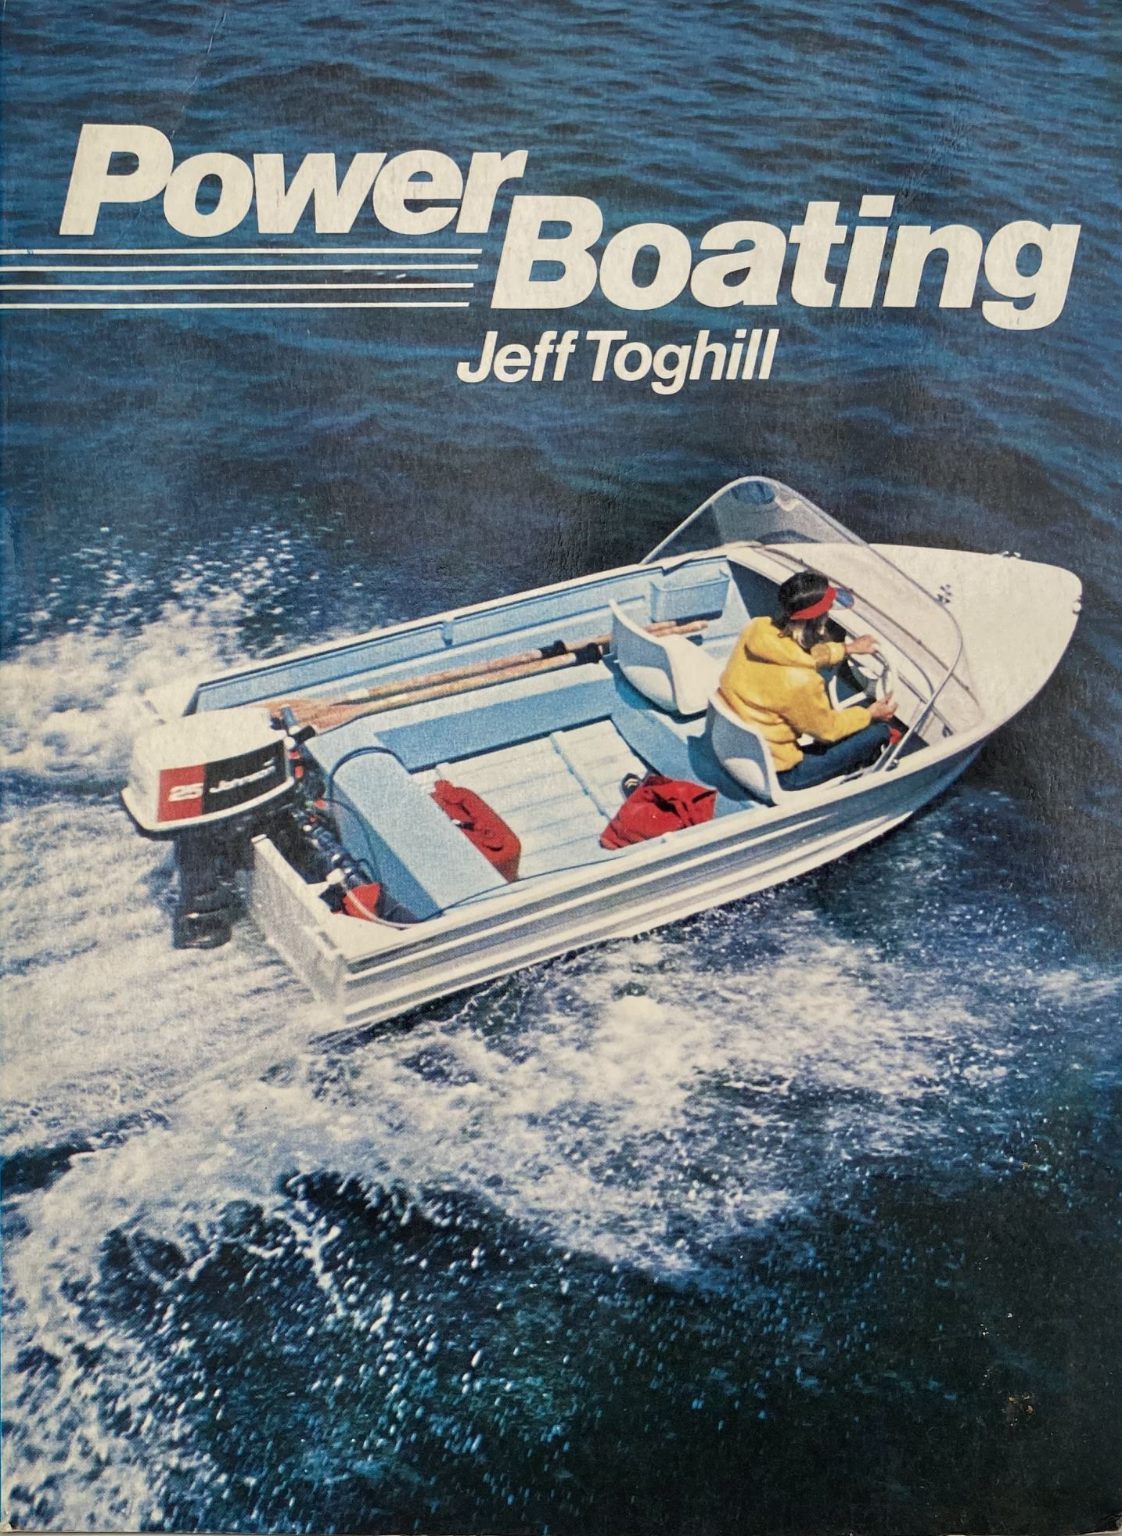 Power Boating